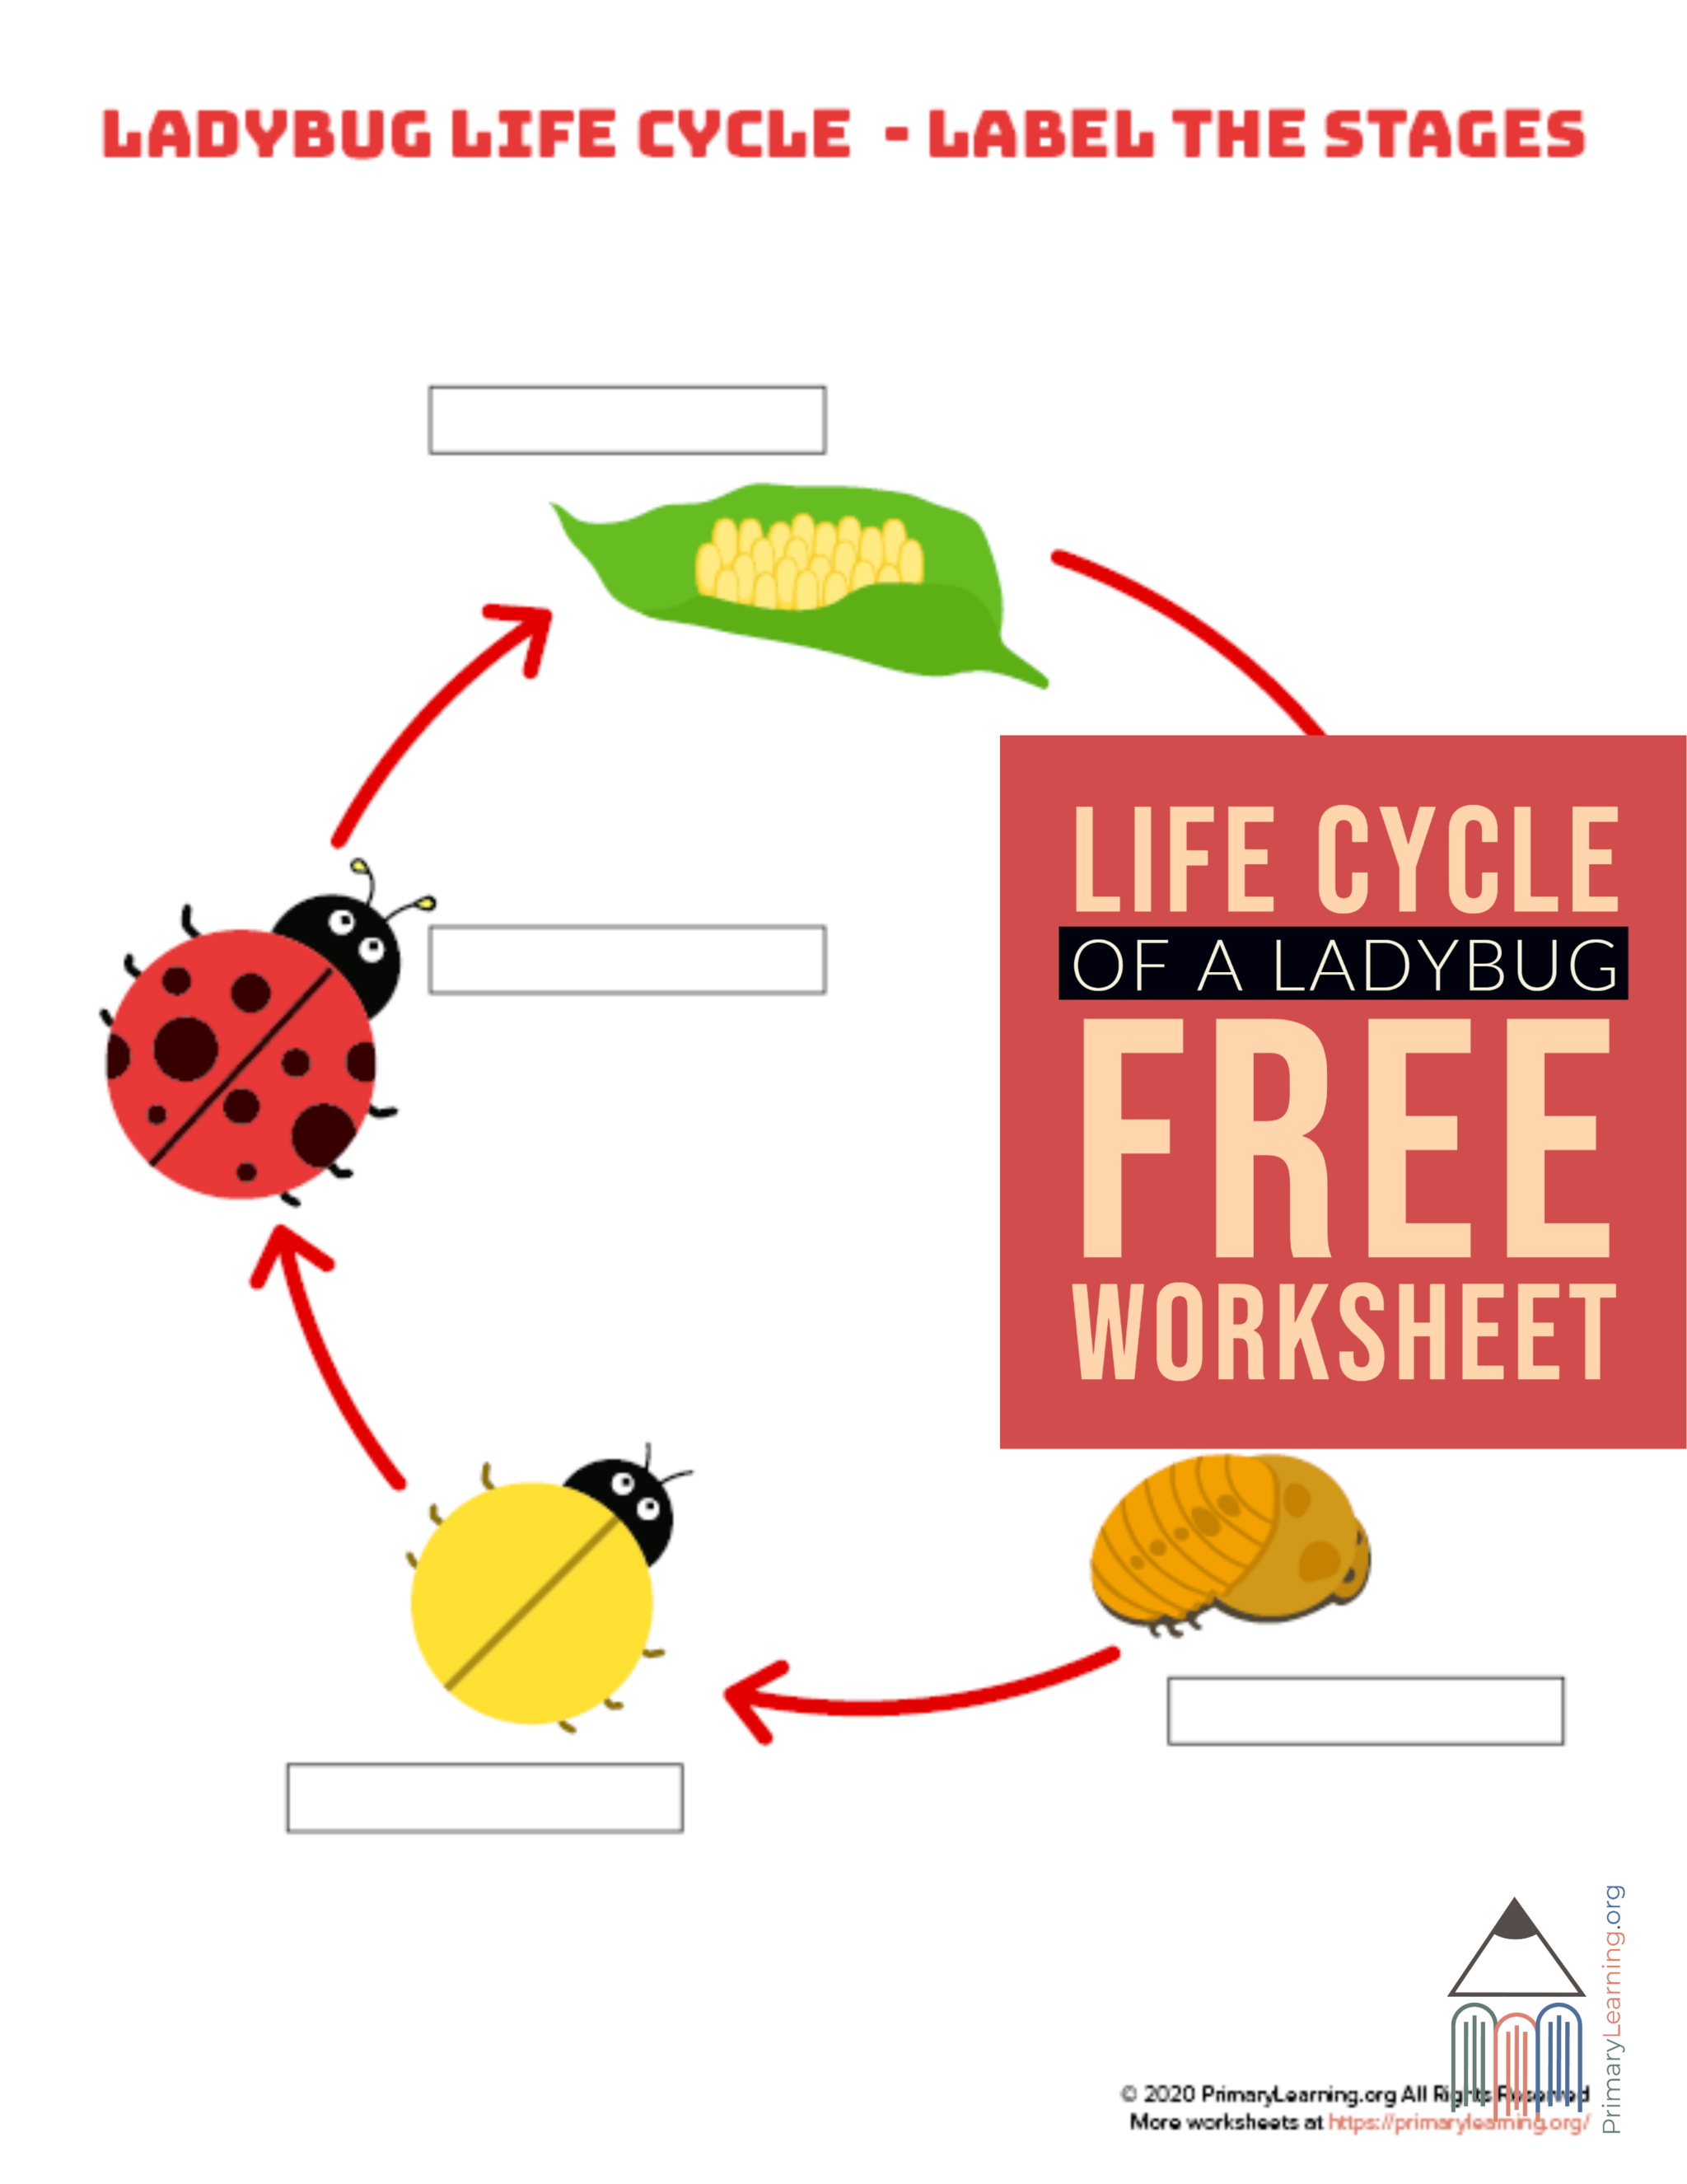 Students Use This Worksheet To Label The Stage Of Ladybug Life Cycle 